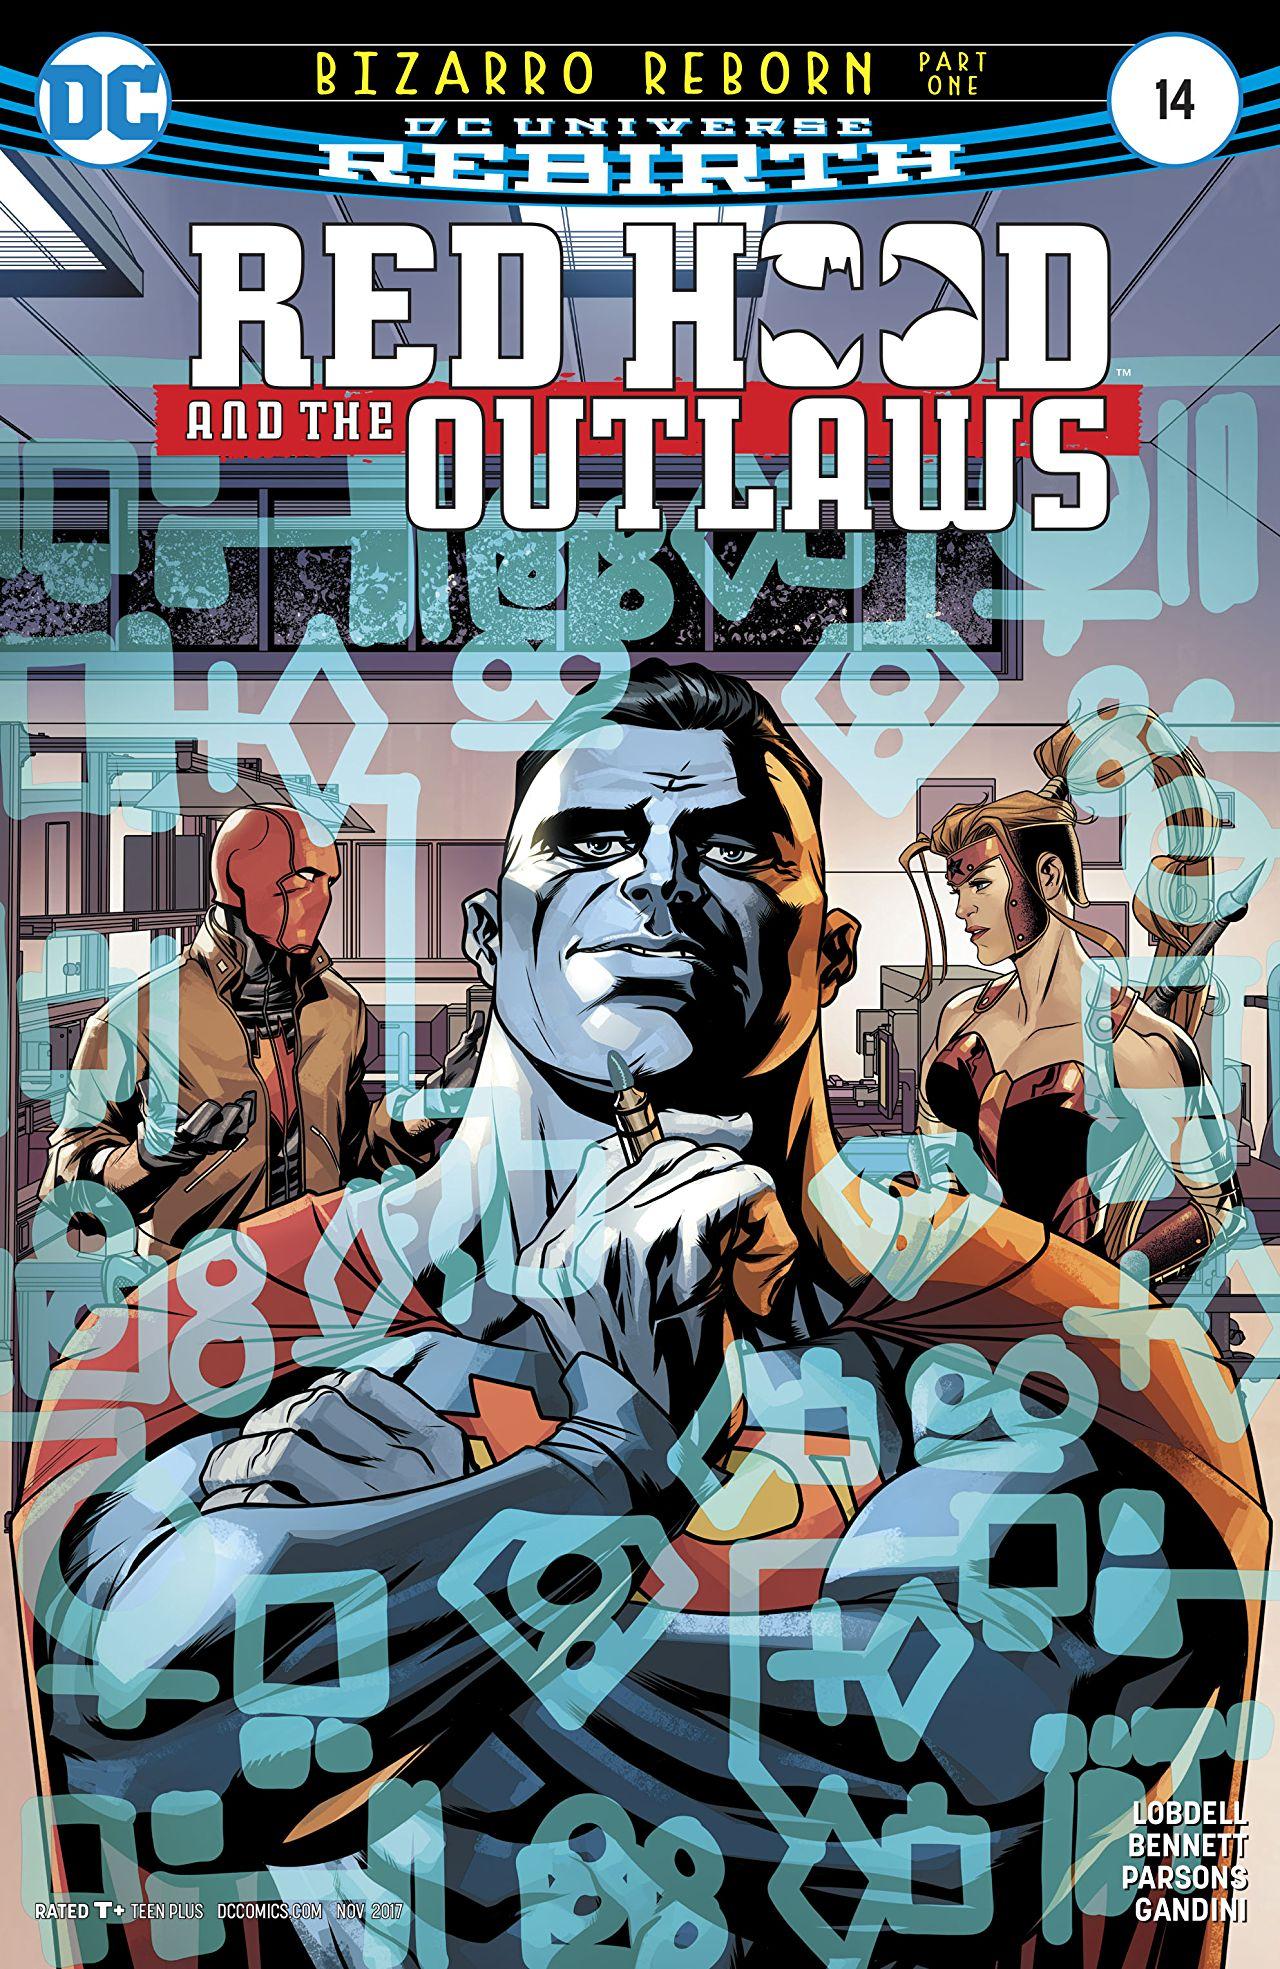 Red Hood and the Outlaws Vol. 2 #14